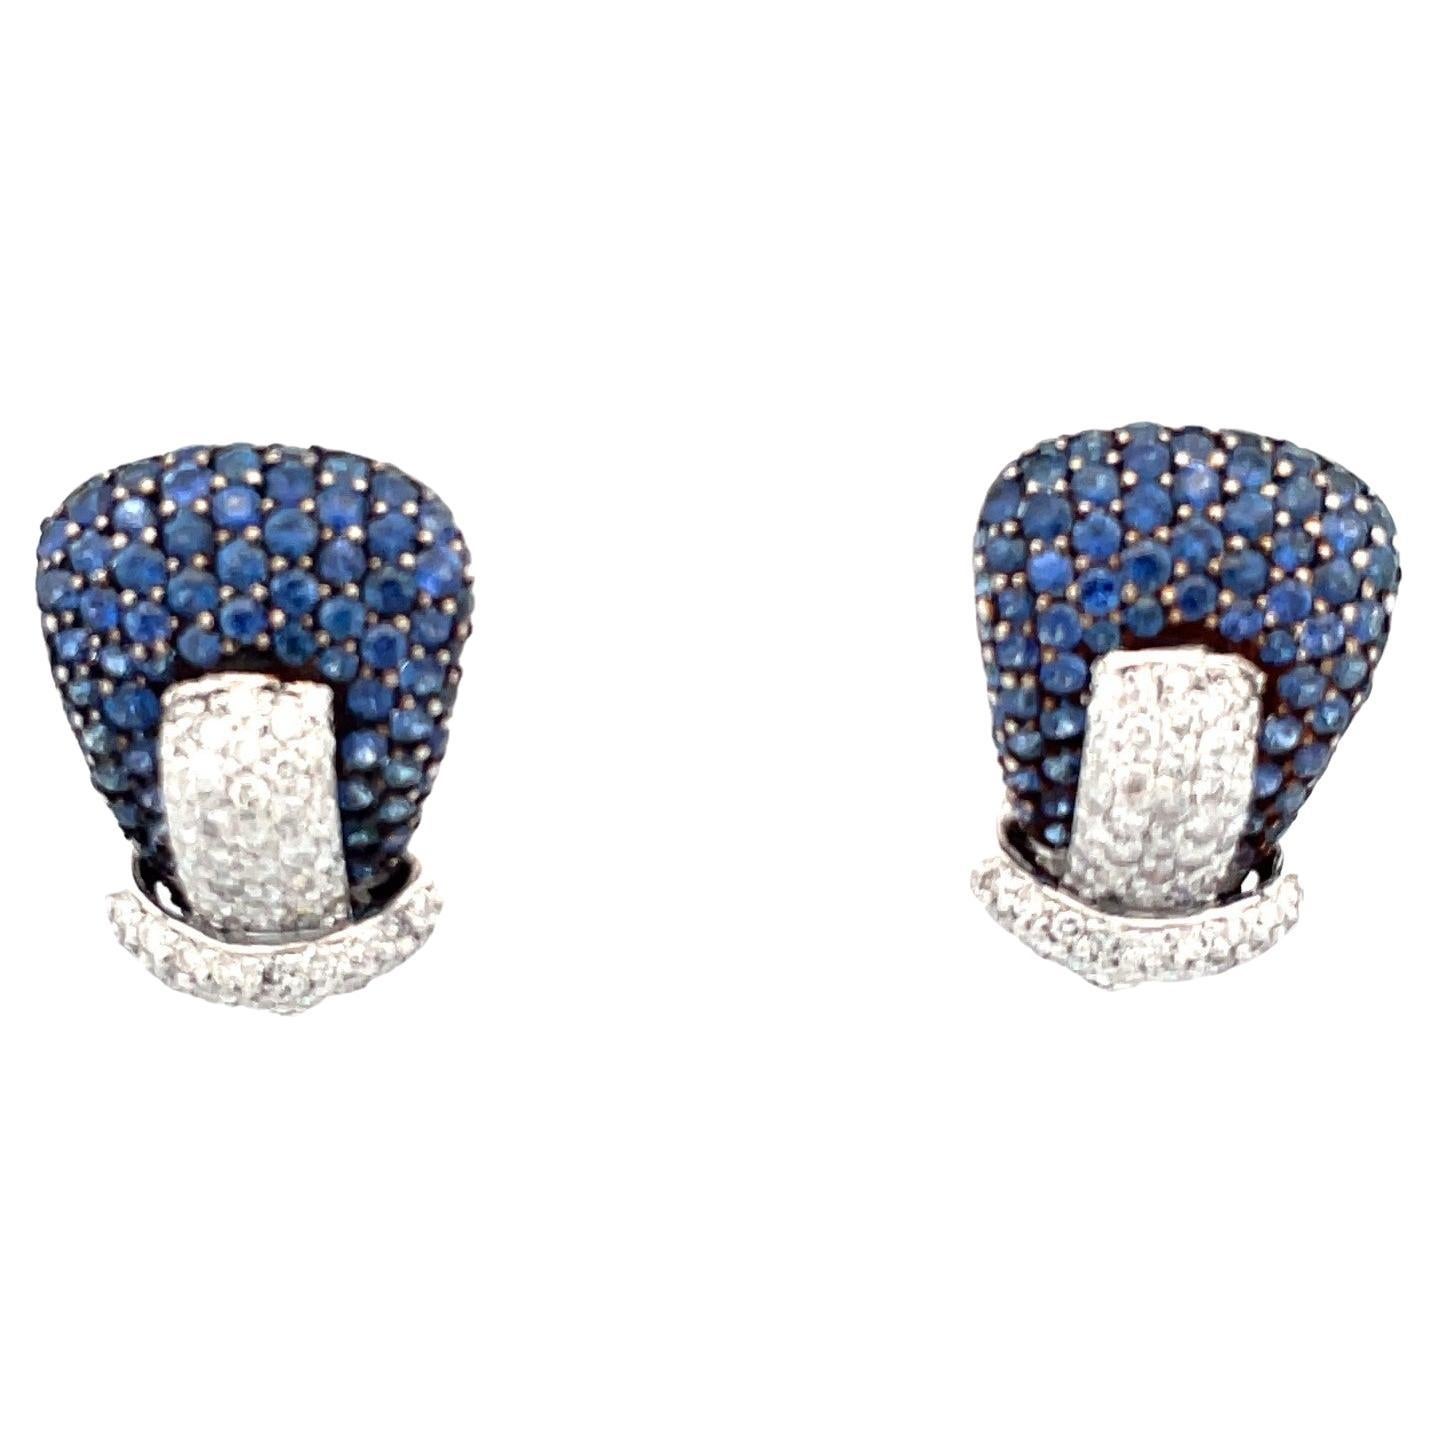 Pave Buckle Earrings With Natural Blue Sapphire & Diamond in 18 Karat White Gold